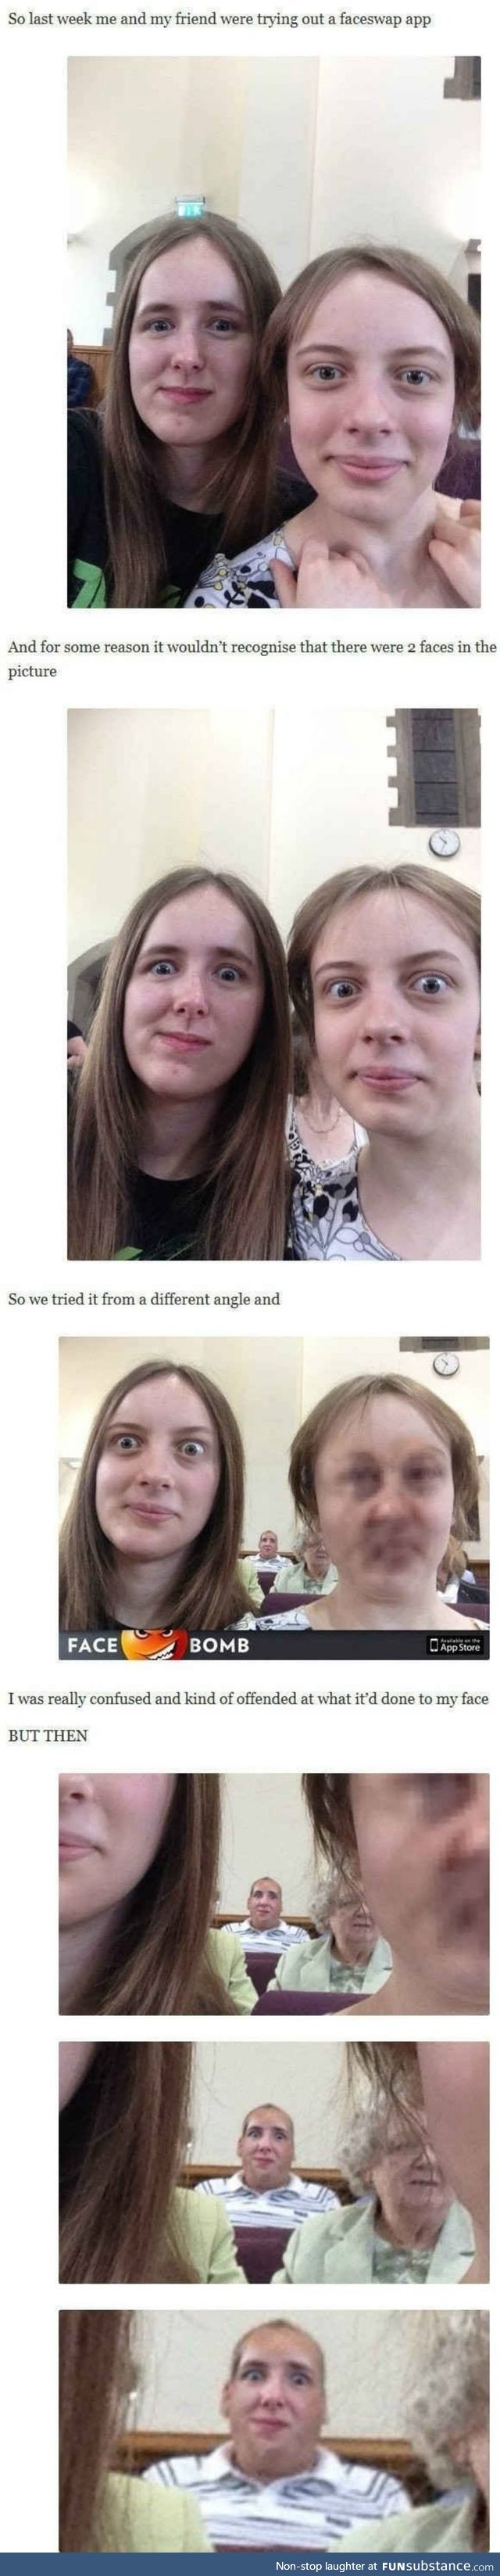 Why can't the faces swap?